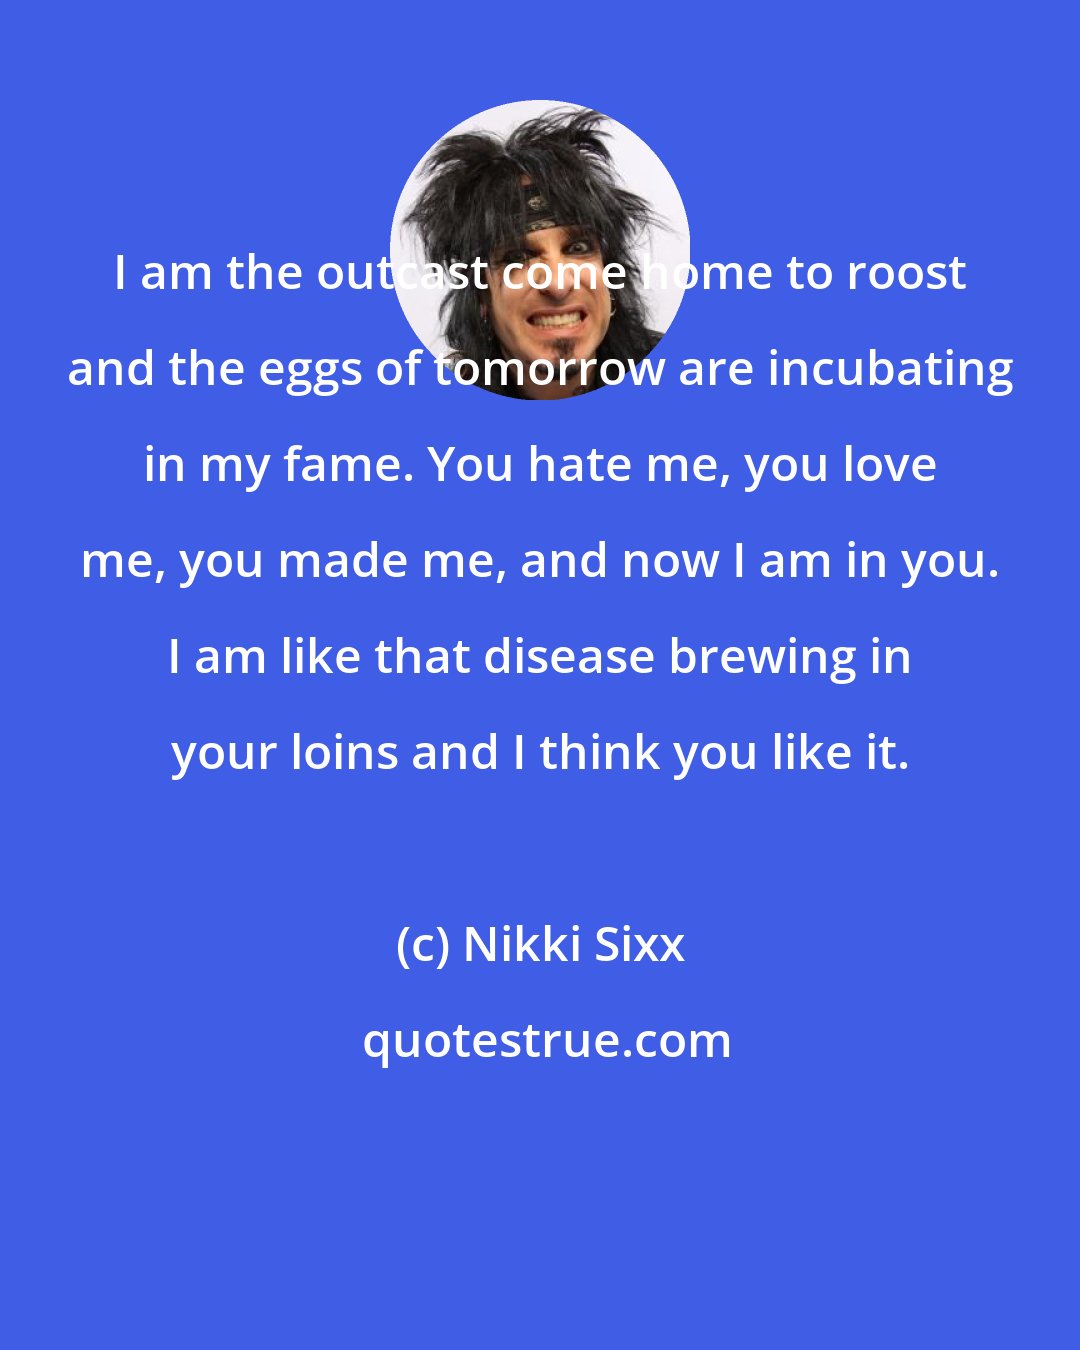 Nikki Sixx: I am the outcast come home to roost and the eggs of tomorrow are incubating in my fame. You hate me, you love me, you made me, and now I am in you. I am like that disease brewing in your loins and I think you like it.